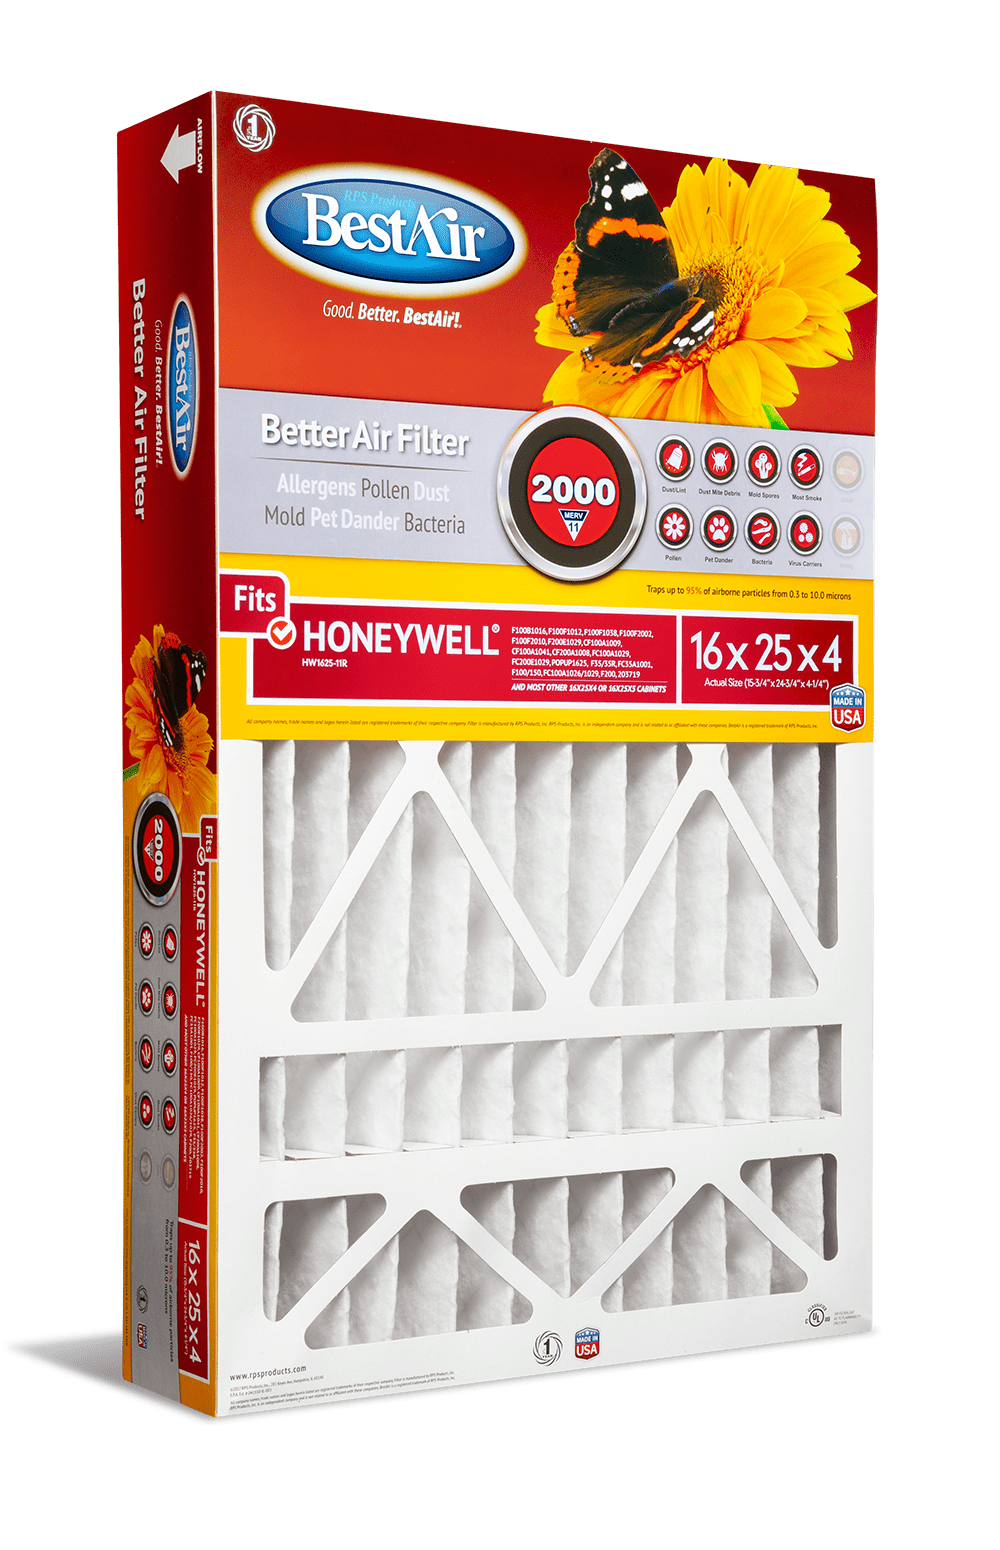 Replacement For Honeywell FC35A1001 16x25x4 Air Cleaner Filter MERV 11 